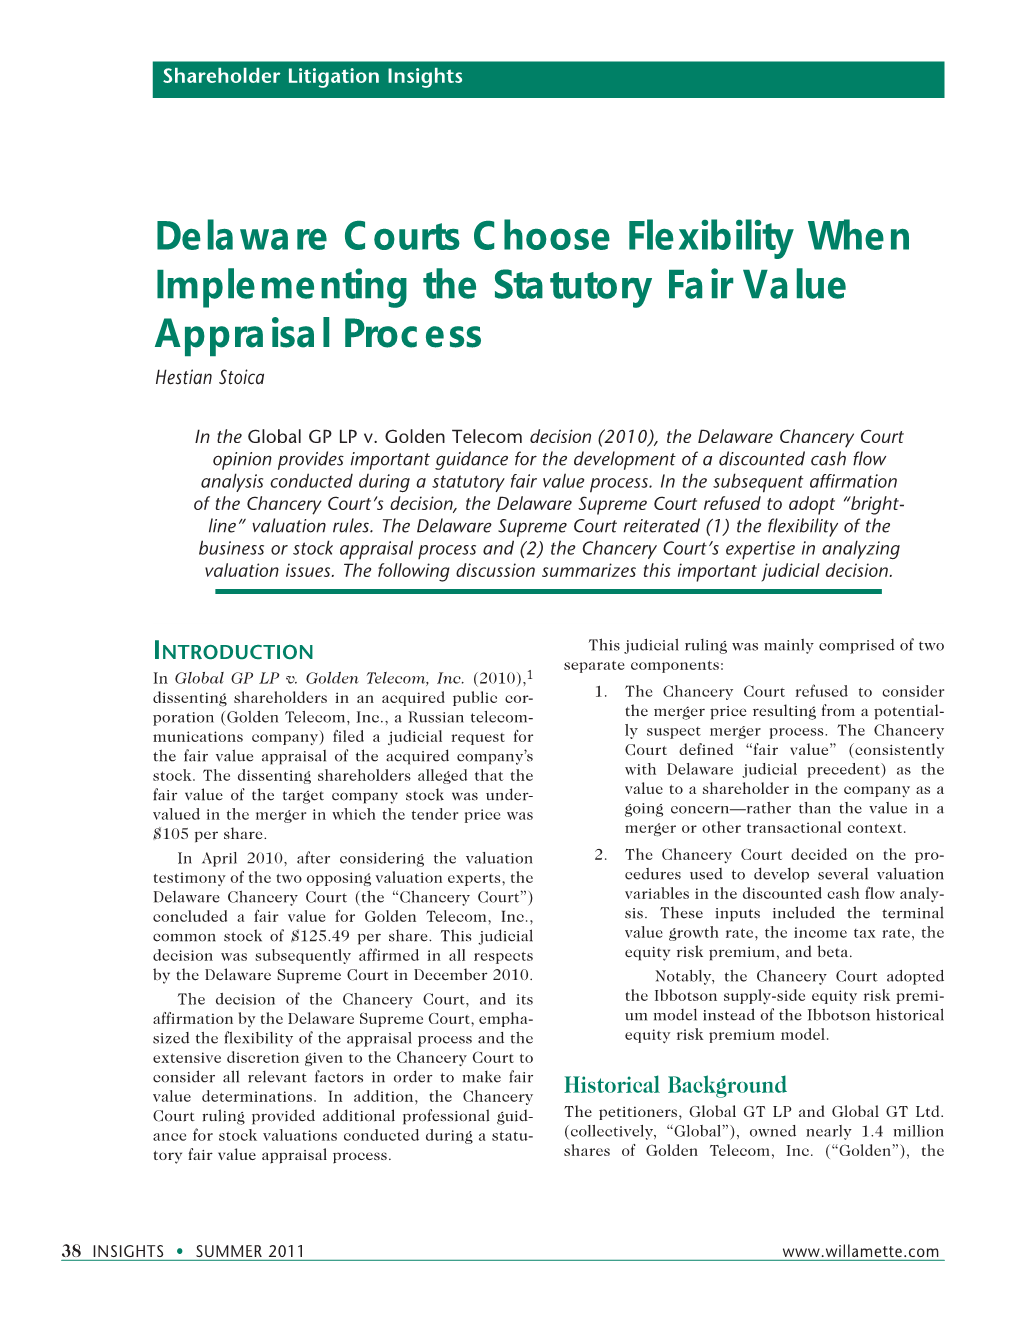 Delaware Courts Choose Flexibility When Implementing the Statutory Fair Value Appraisal Process Hestian Stoica